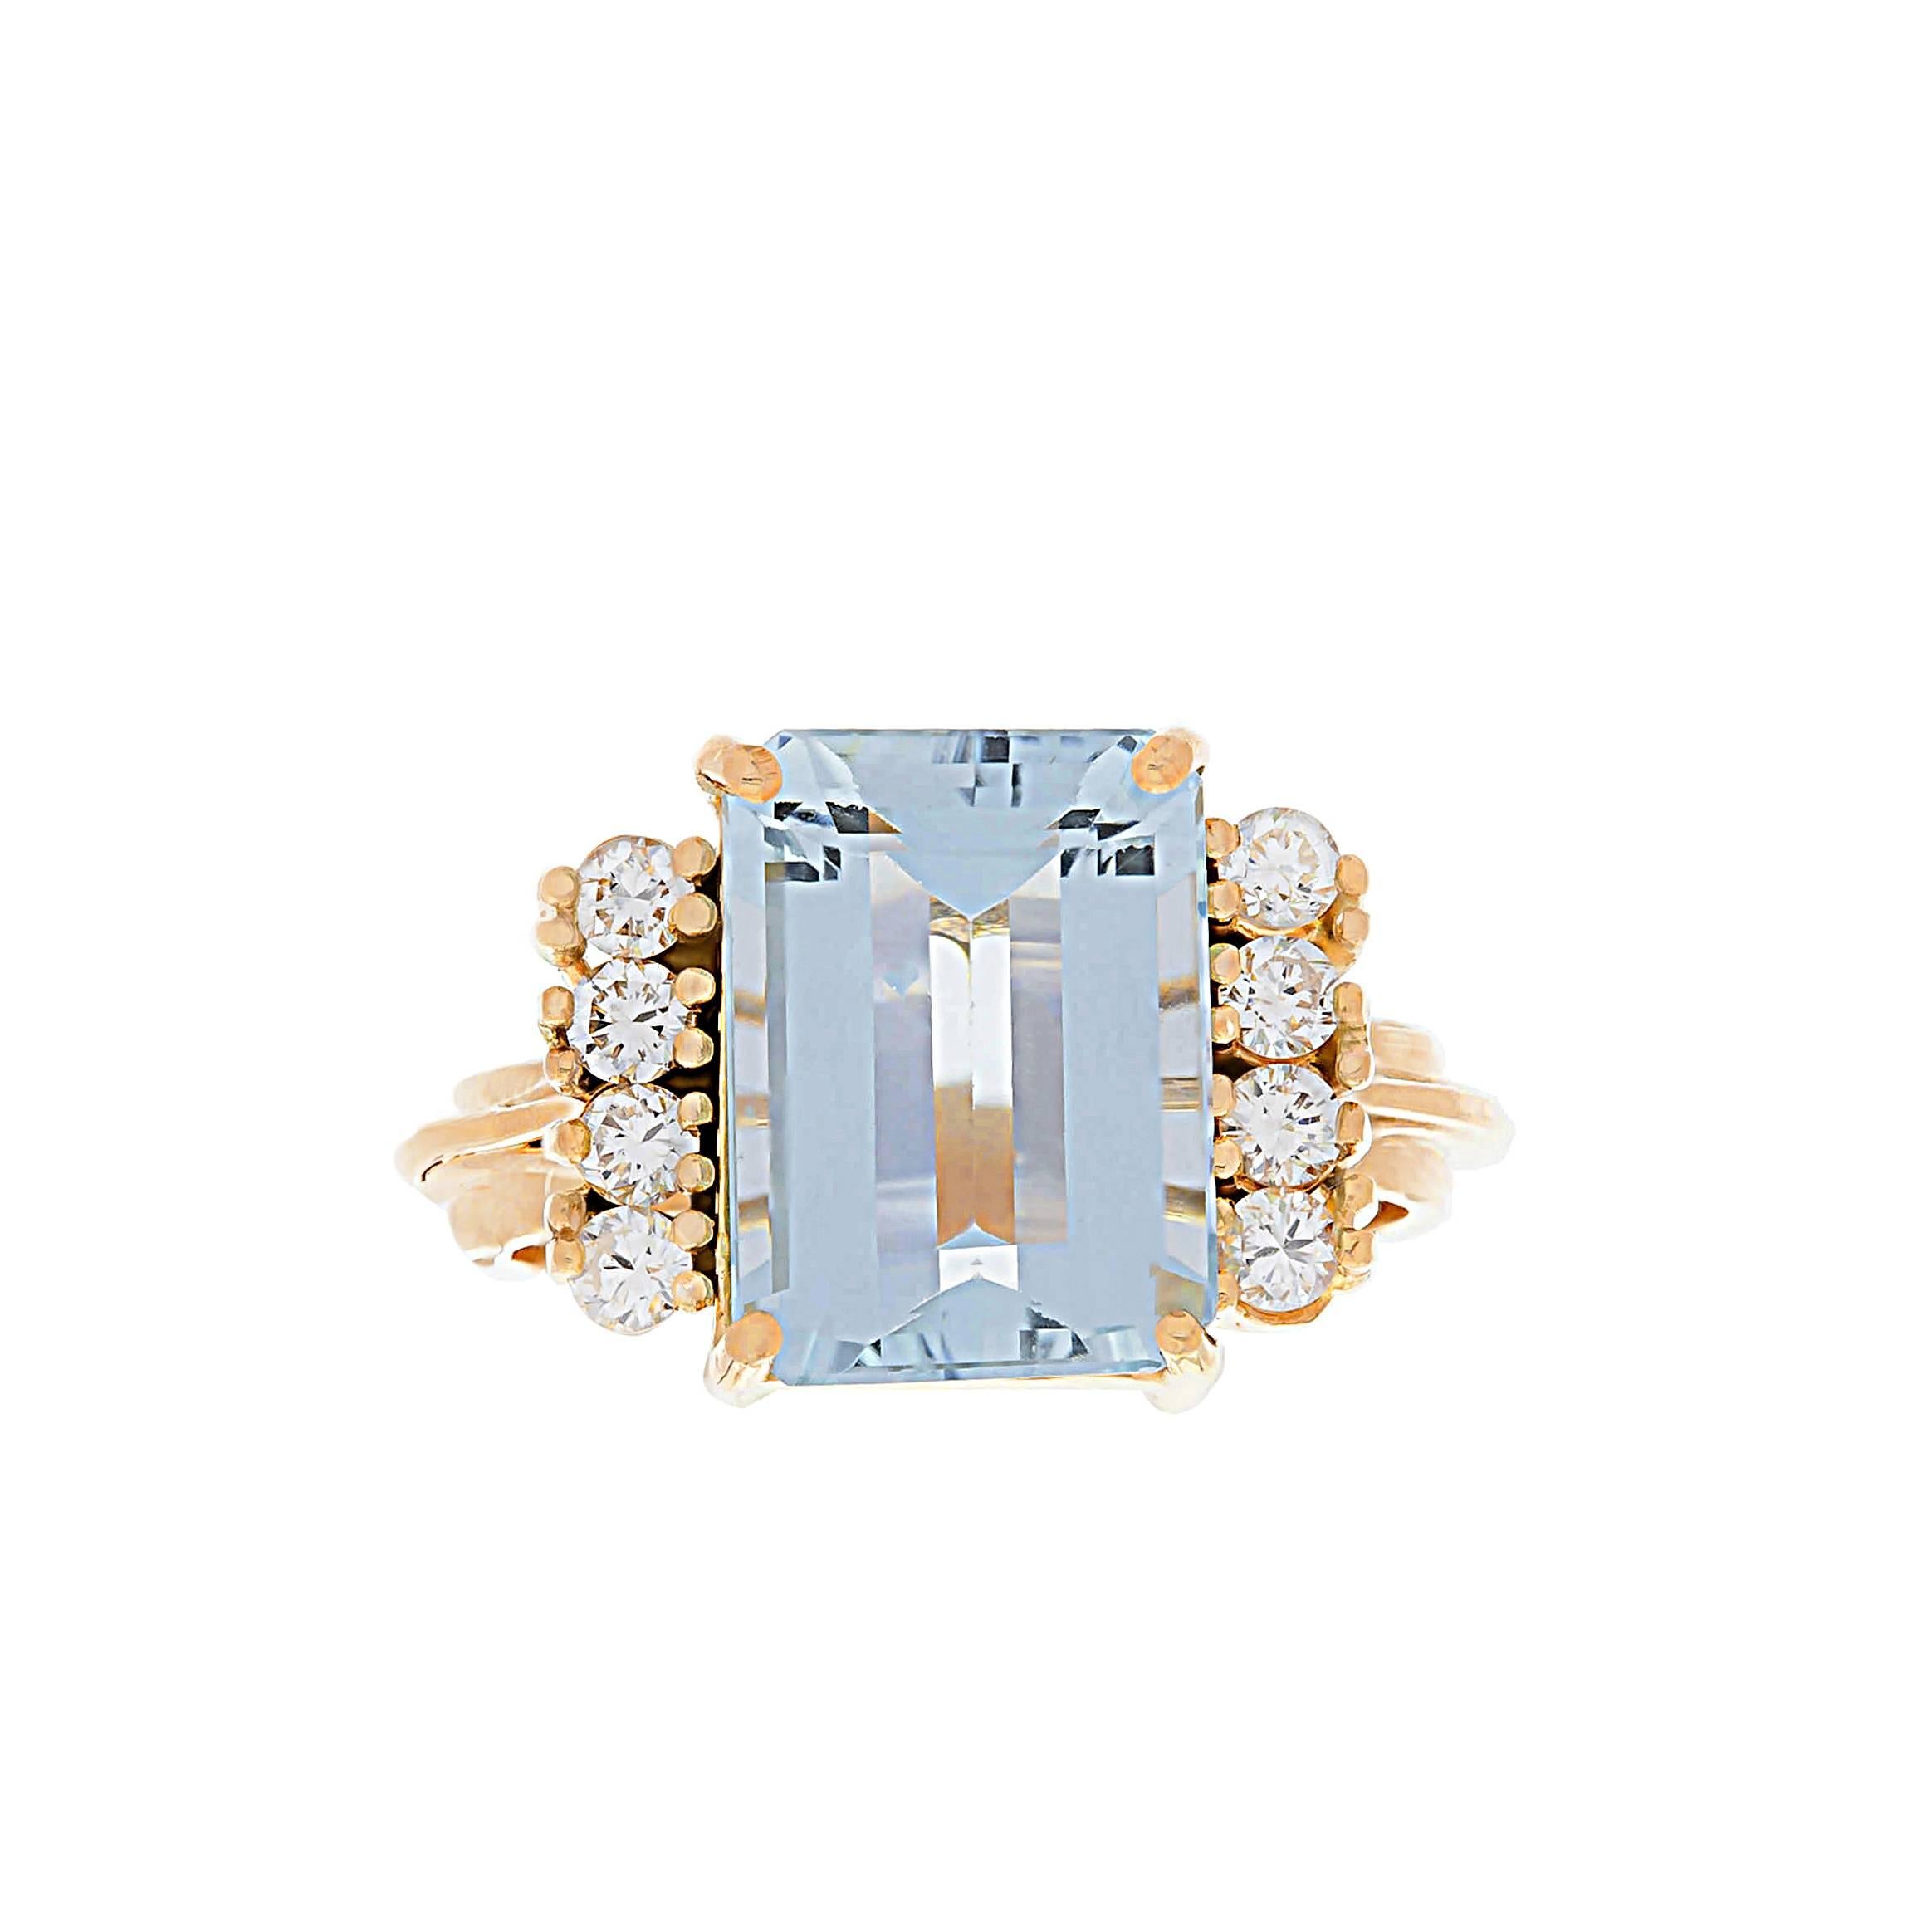 14K yellow gold rings with emerald cut aquamarine weighing 2.57 carats and eight round brilliant cut diamonds weighing combined 0.36 carat.
Can be sized.